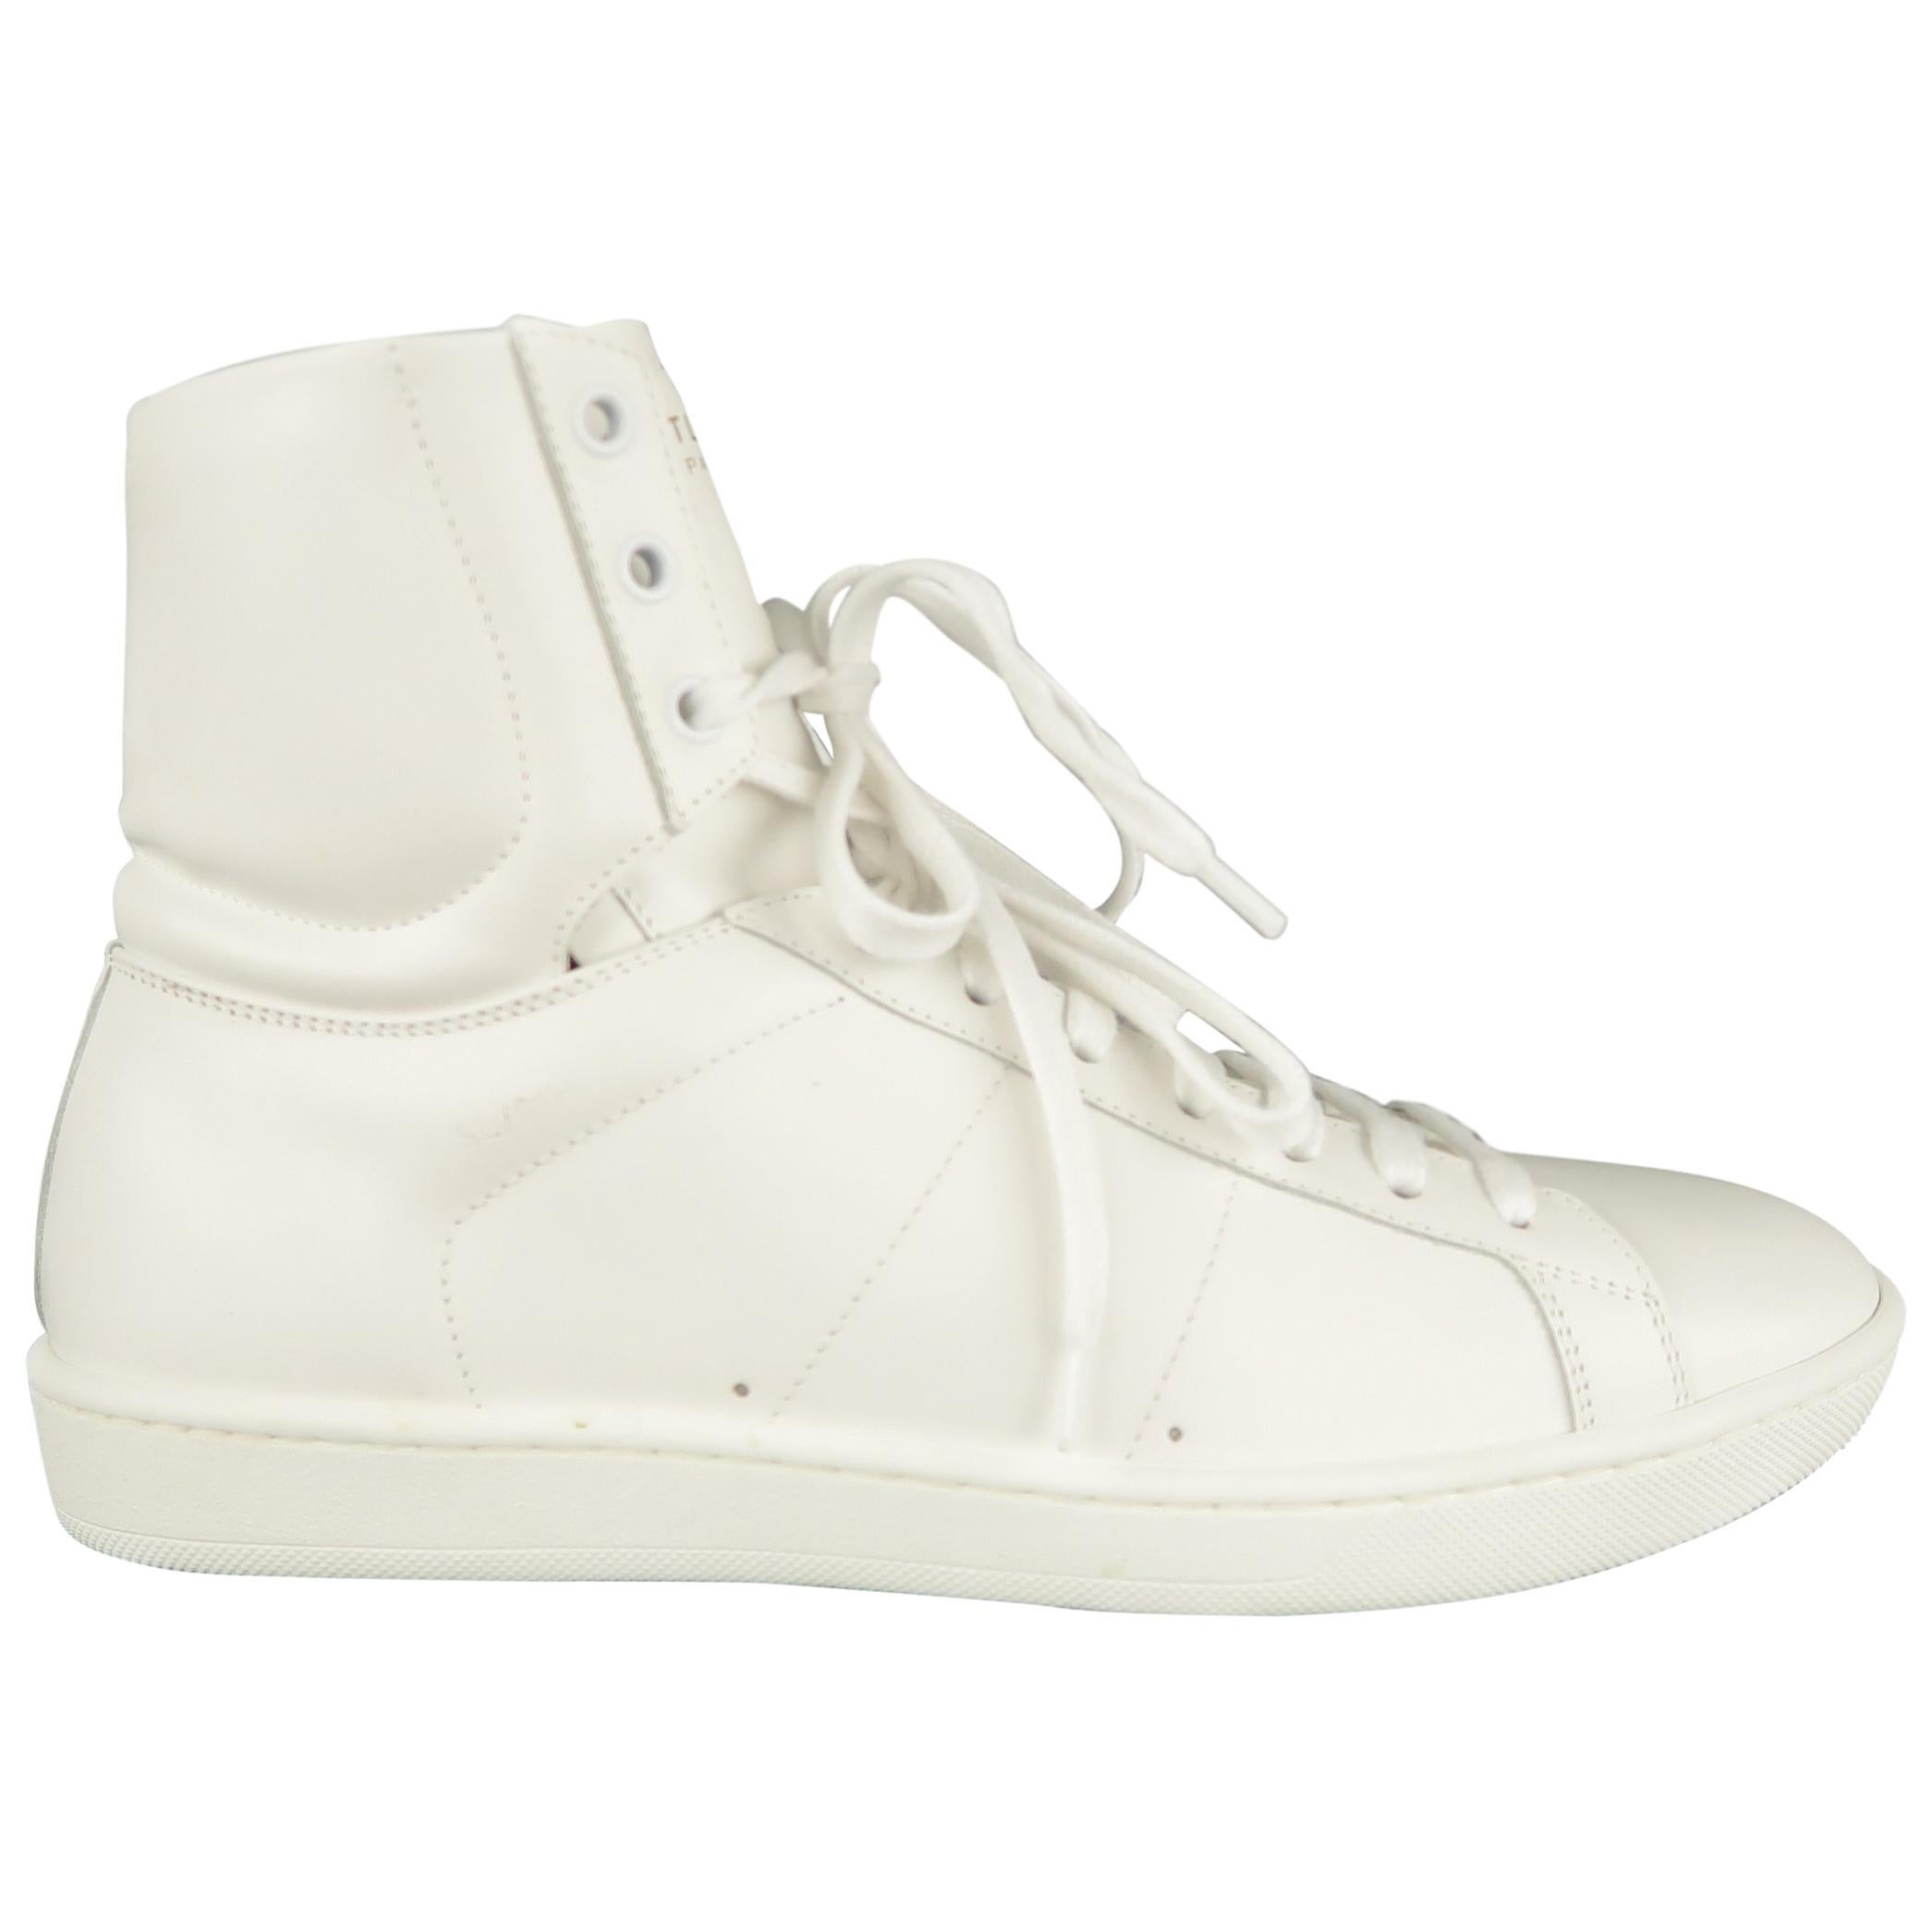 Men's SAINT LAURENT Size 6 White Leather High Top Sneakers w/ Box